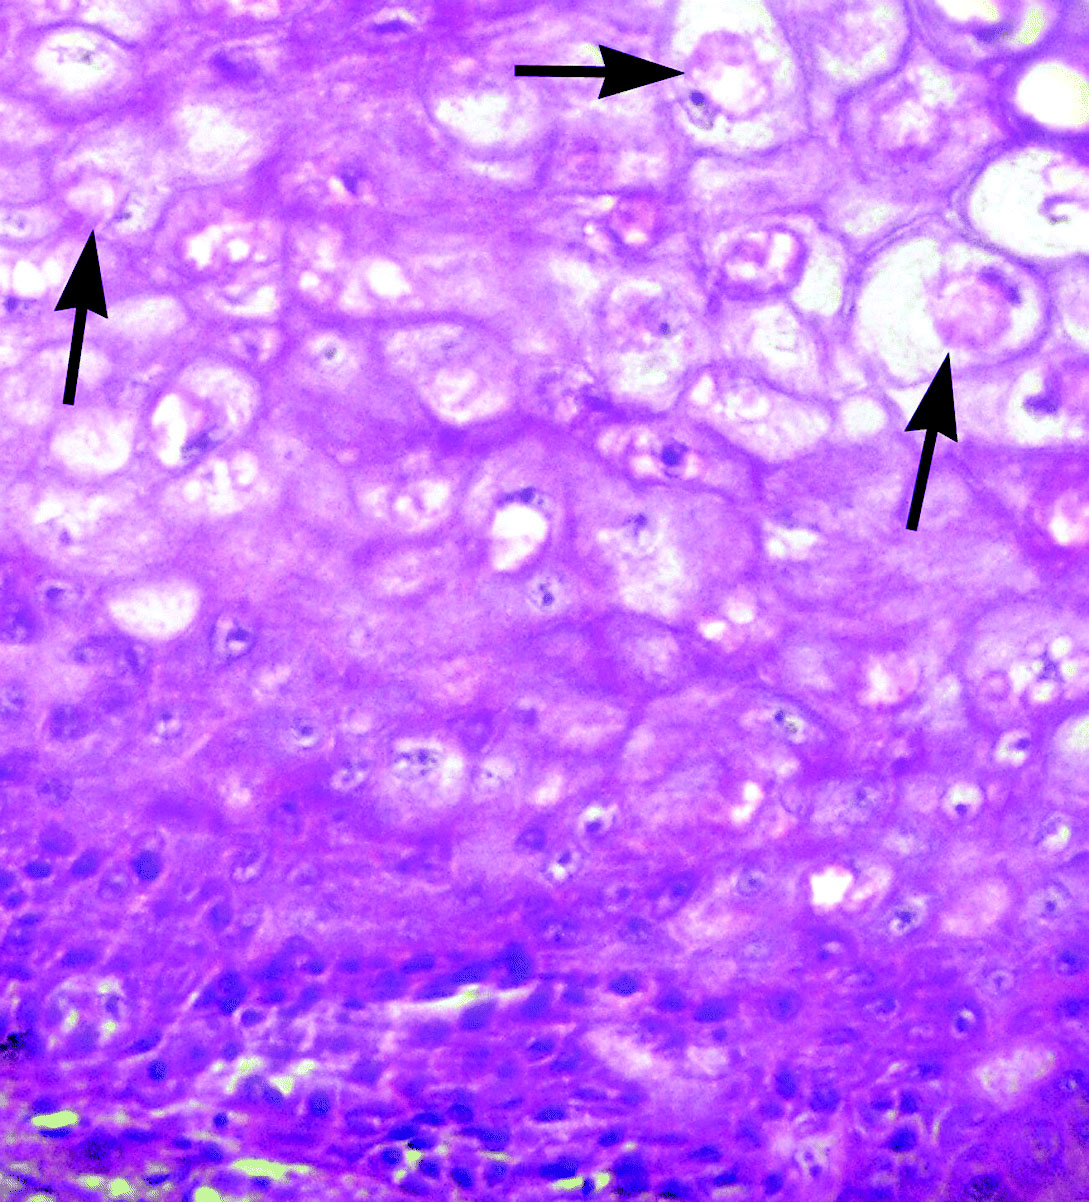 Figure 6.  Histopathology of avian pox lesions in peafowl chicks showing swollen keratinocytes having eosinophilic intracytoplasmic (Bollinger bodies) inclusion bodies (arrows) pushing the nucleus to a side. Haematoxylin and eosin. Magnification x400.